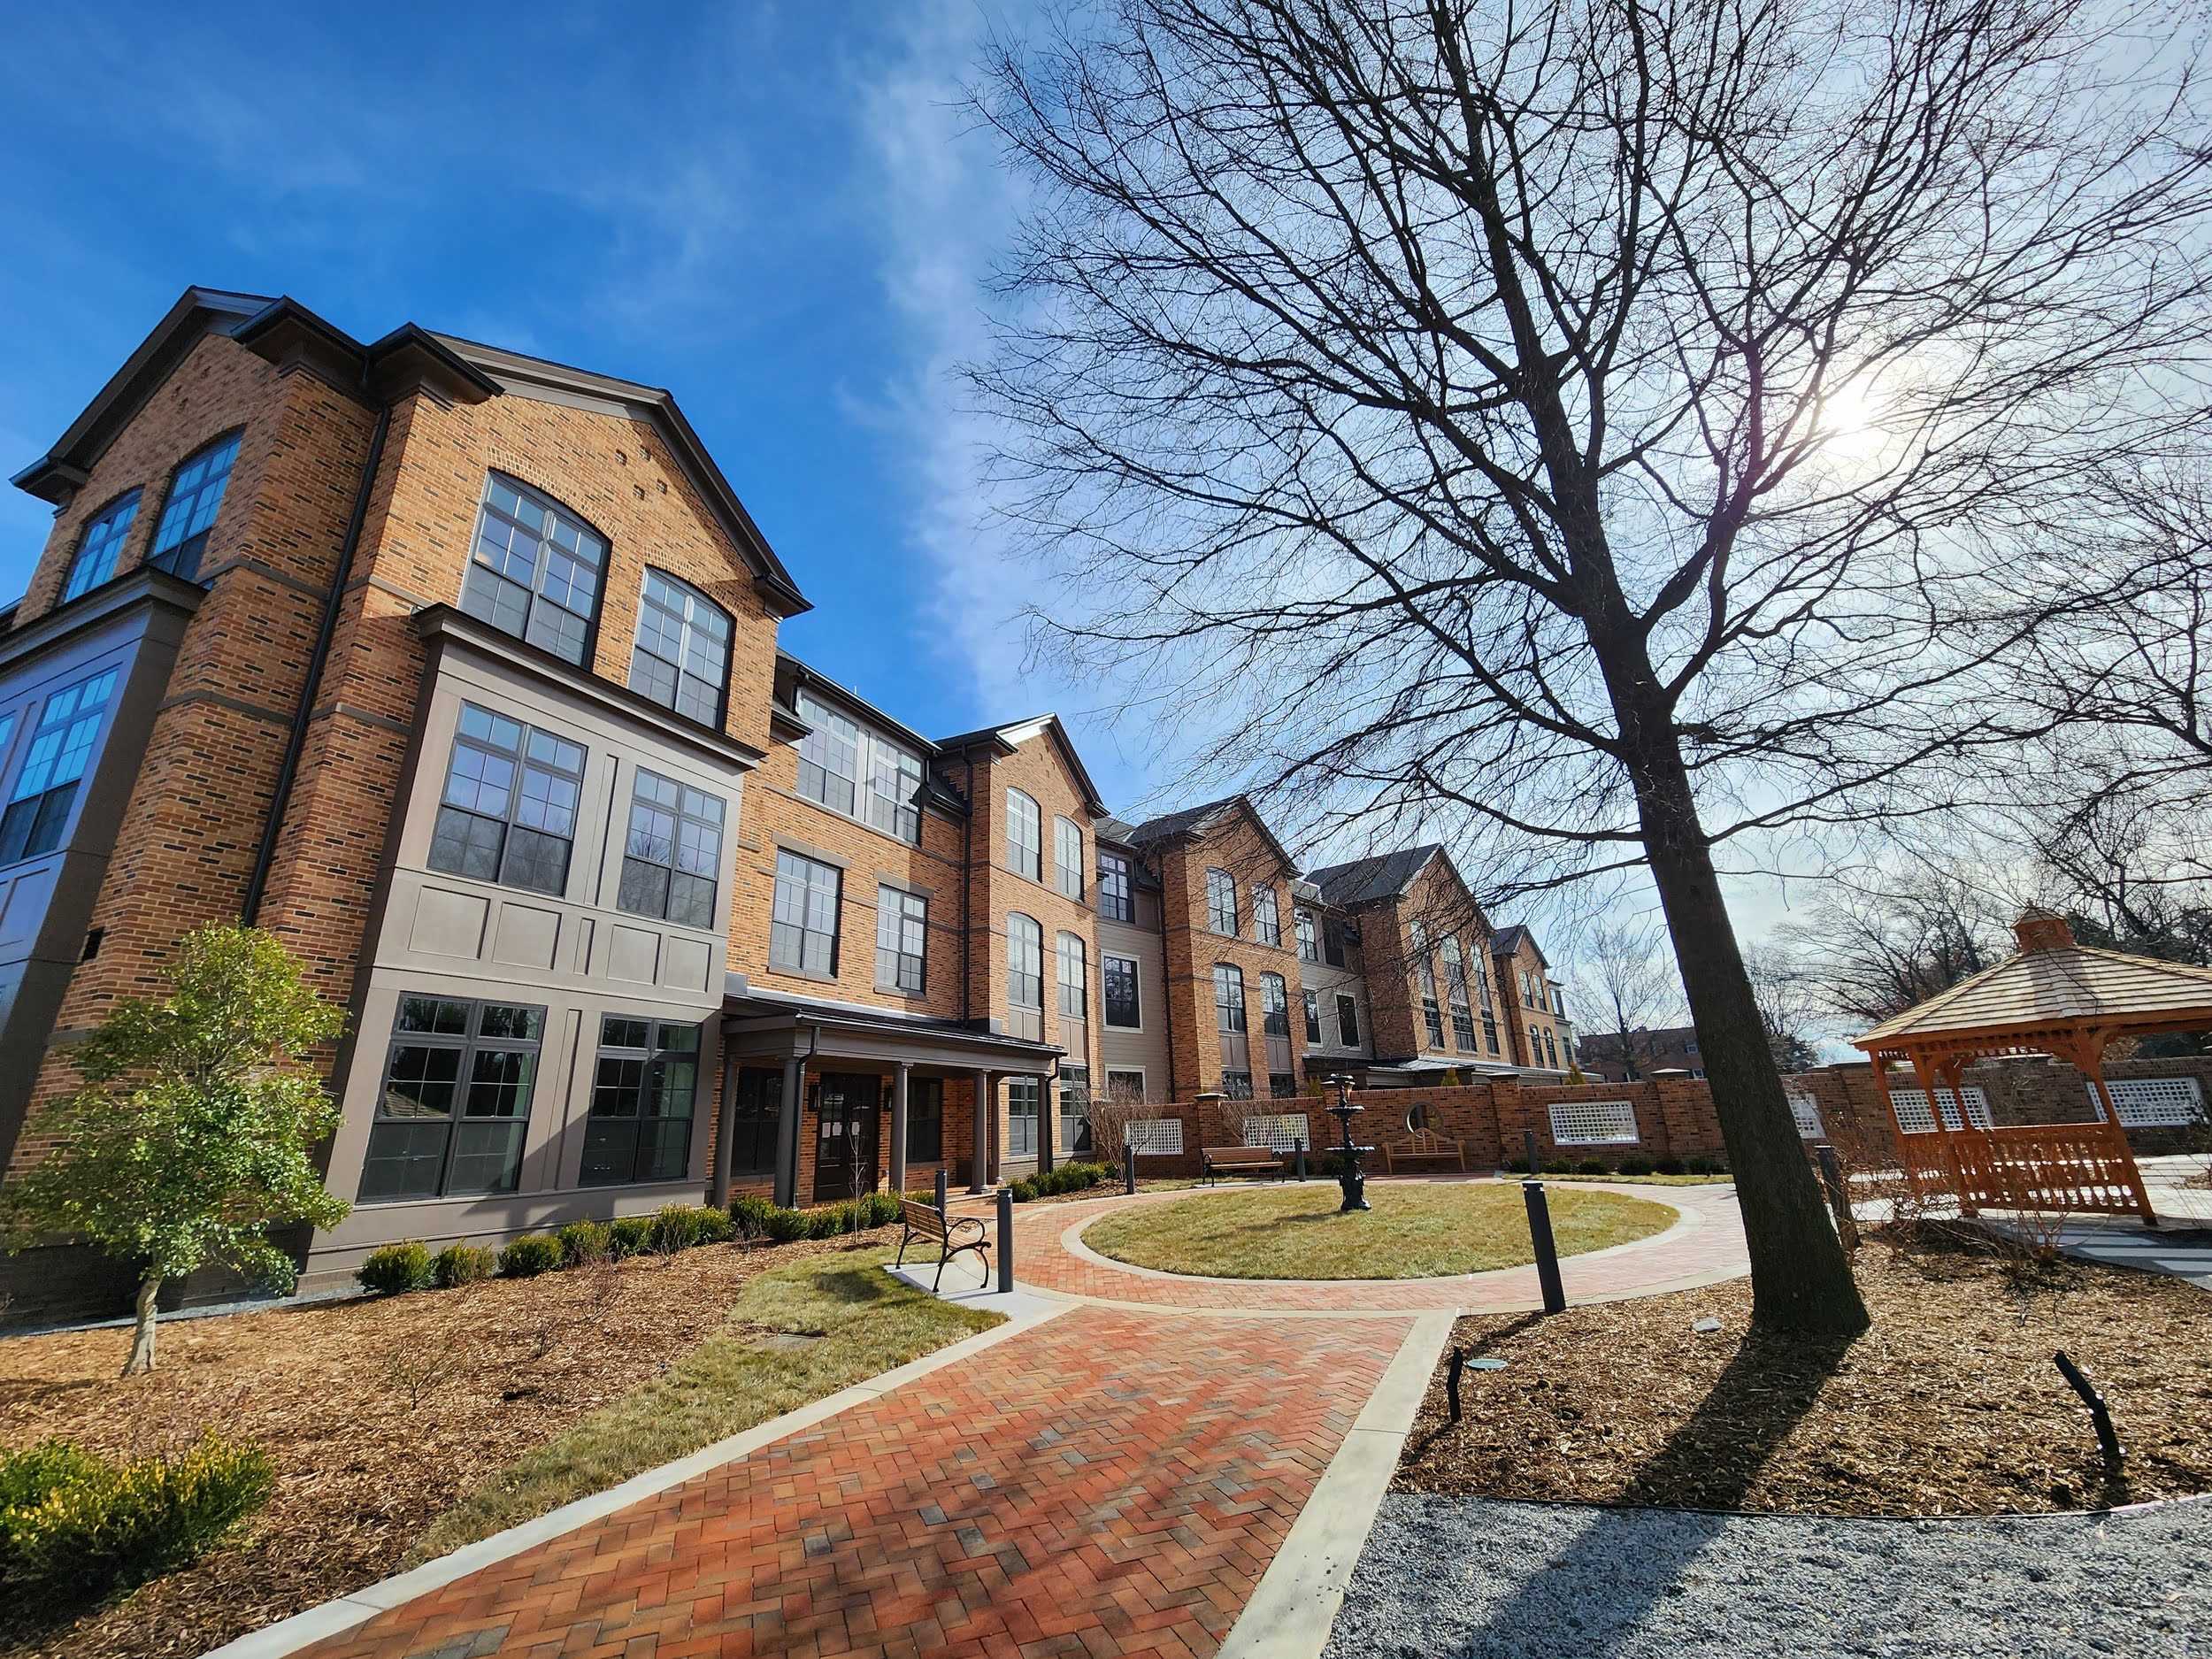 Sunrise Senior Living Opens New Northern Virginia Community to Serve More Than 120 Residents Situated in The Heart of McLean